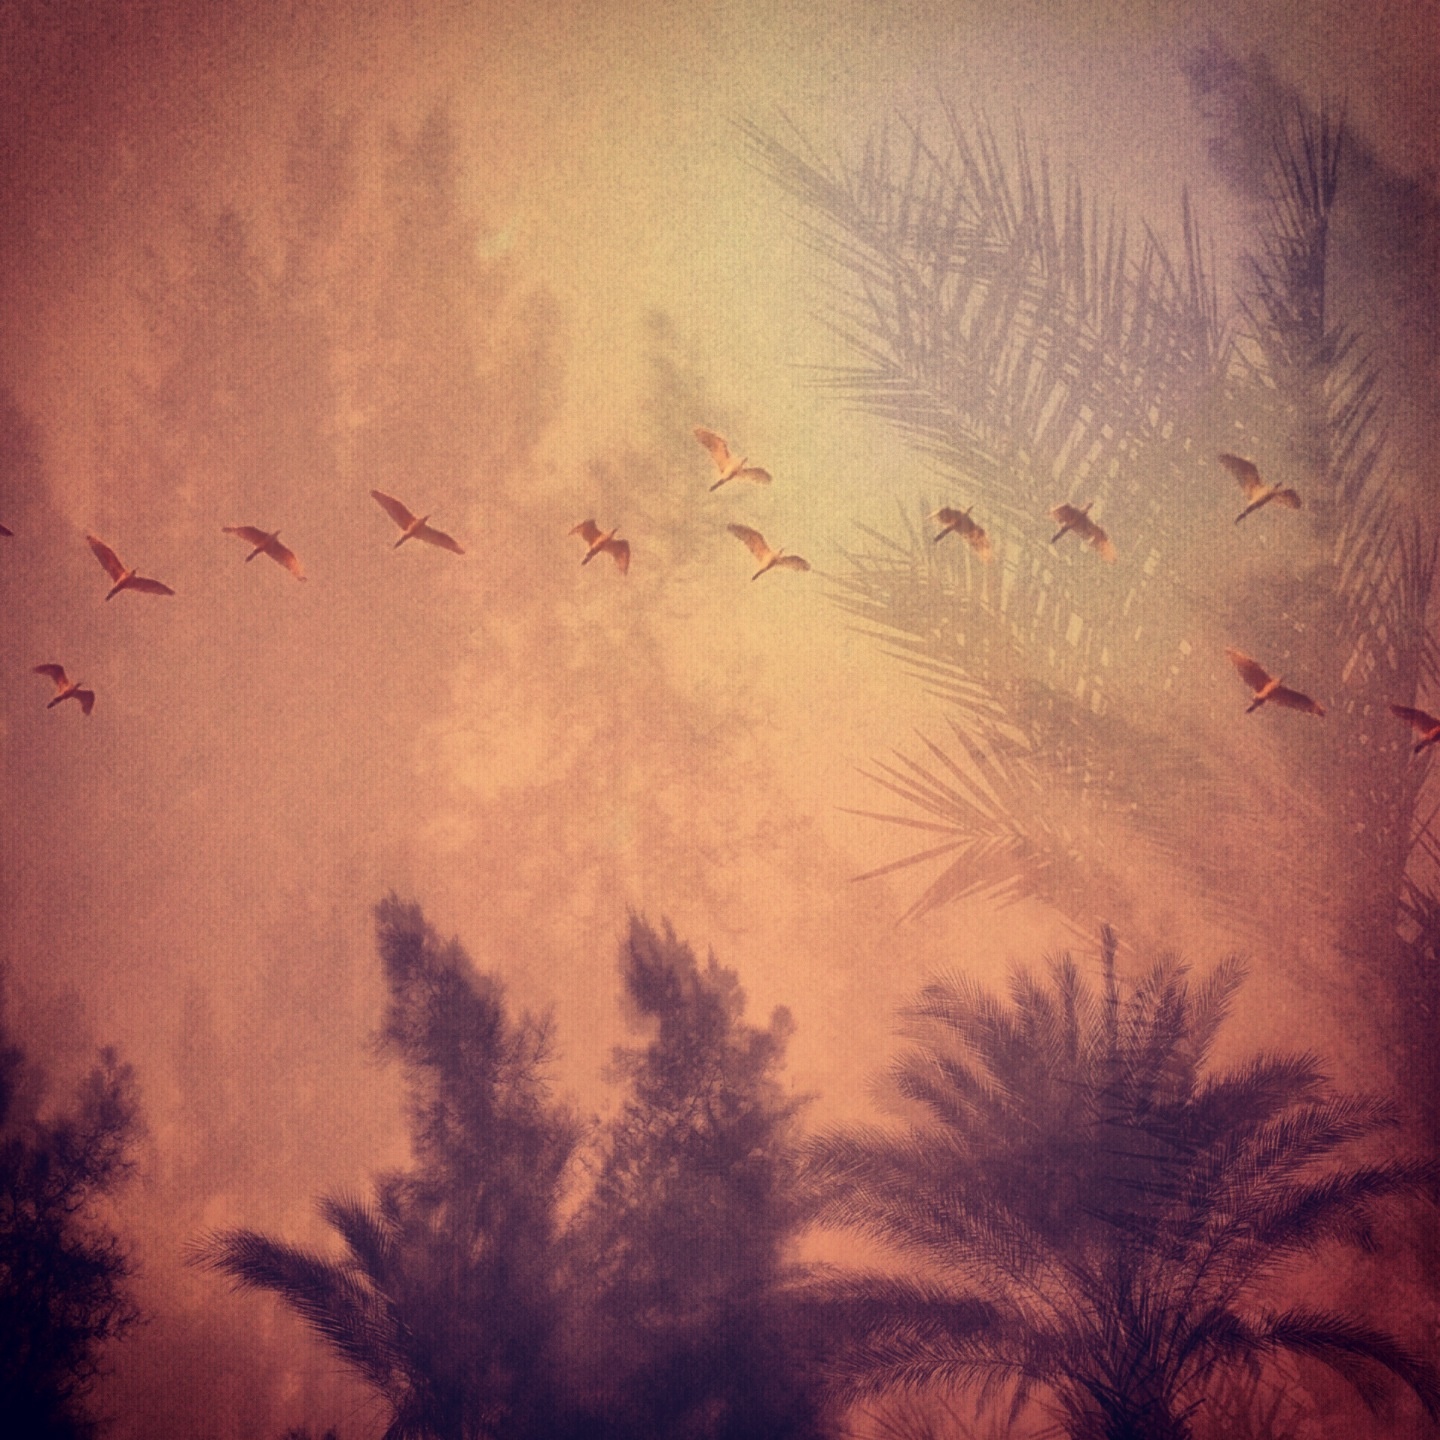 Dec. 31, 2013. On the last day of this year, I looked out my window to find dark clouds full of fear. Then a row of winged beauties circled the sky .. high. As I watched them fly, I silently bid the year's memories goodbye and made room for new ones to come by. Cairo, Egypt.
                              @laura_eltantawy